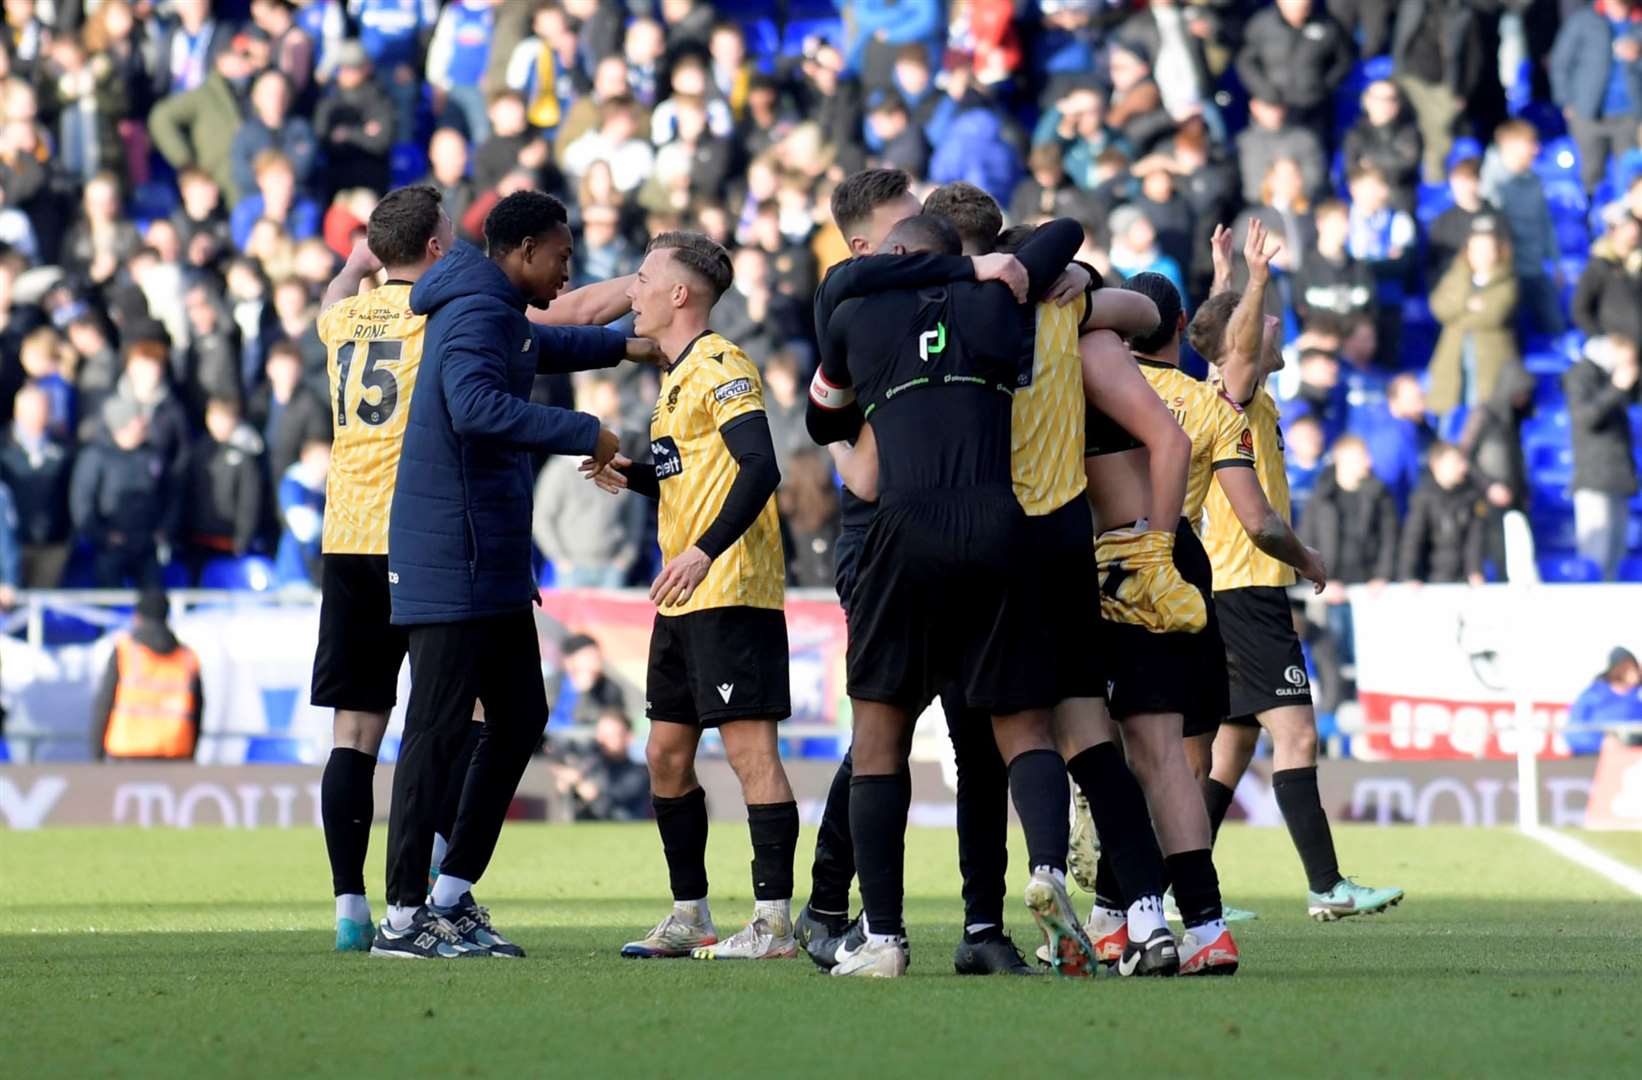 Maidstone United players celebrating at Portman Road. Picture: Barry Goodwin